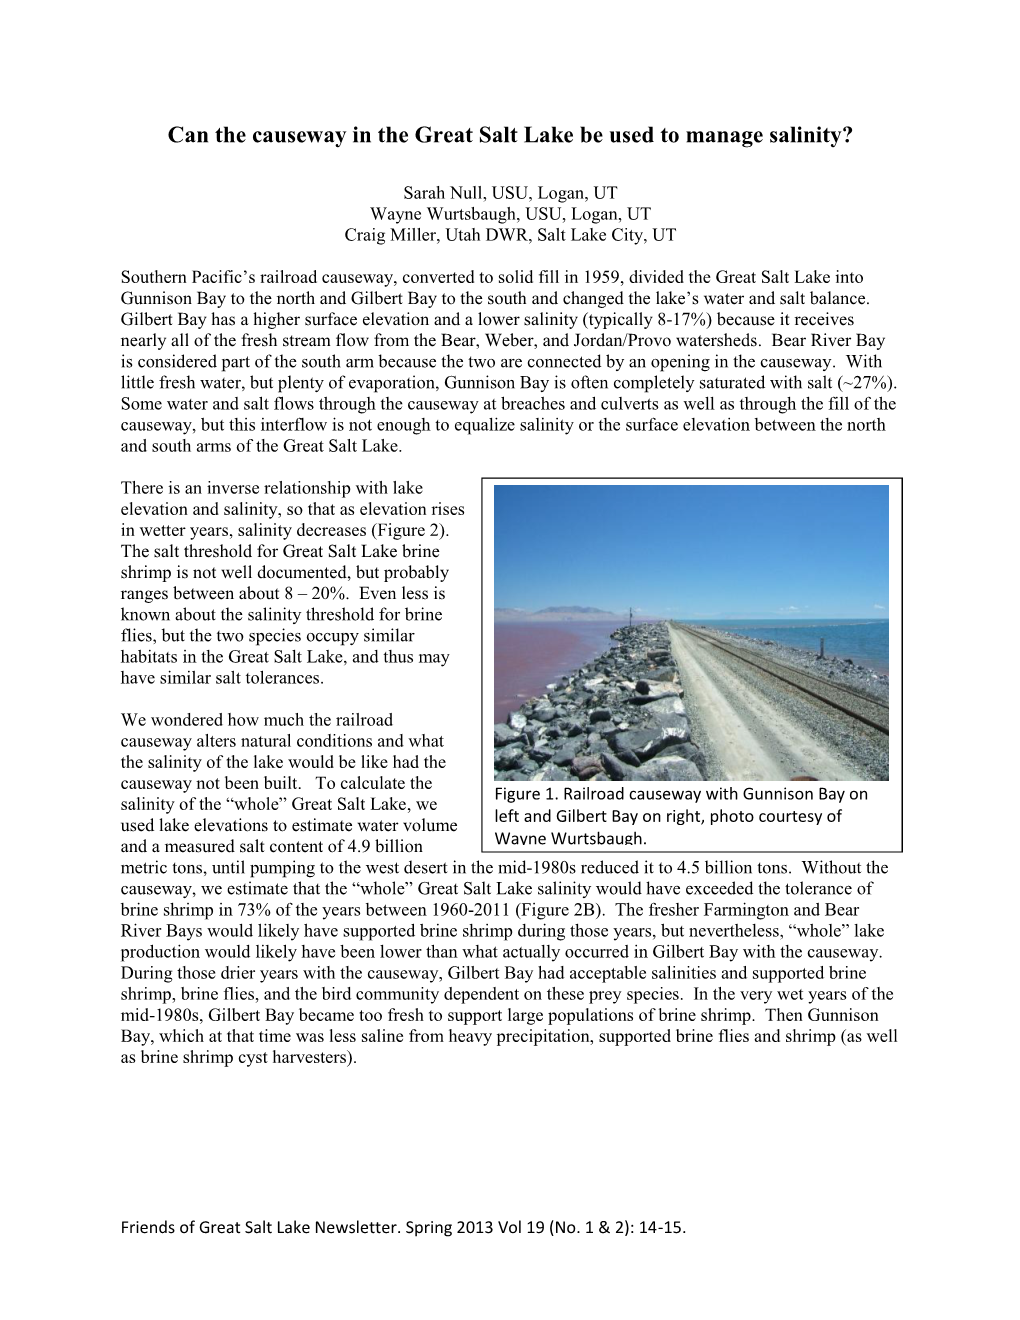 Can the Causeway in the Great Salt Lake Be Used to Manage Salinity?